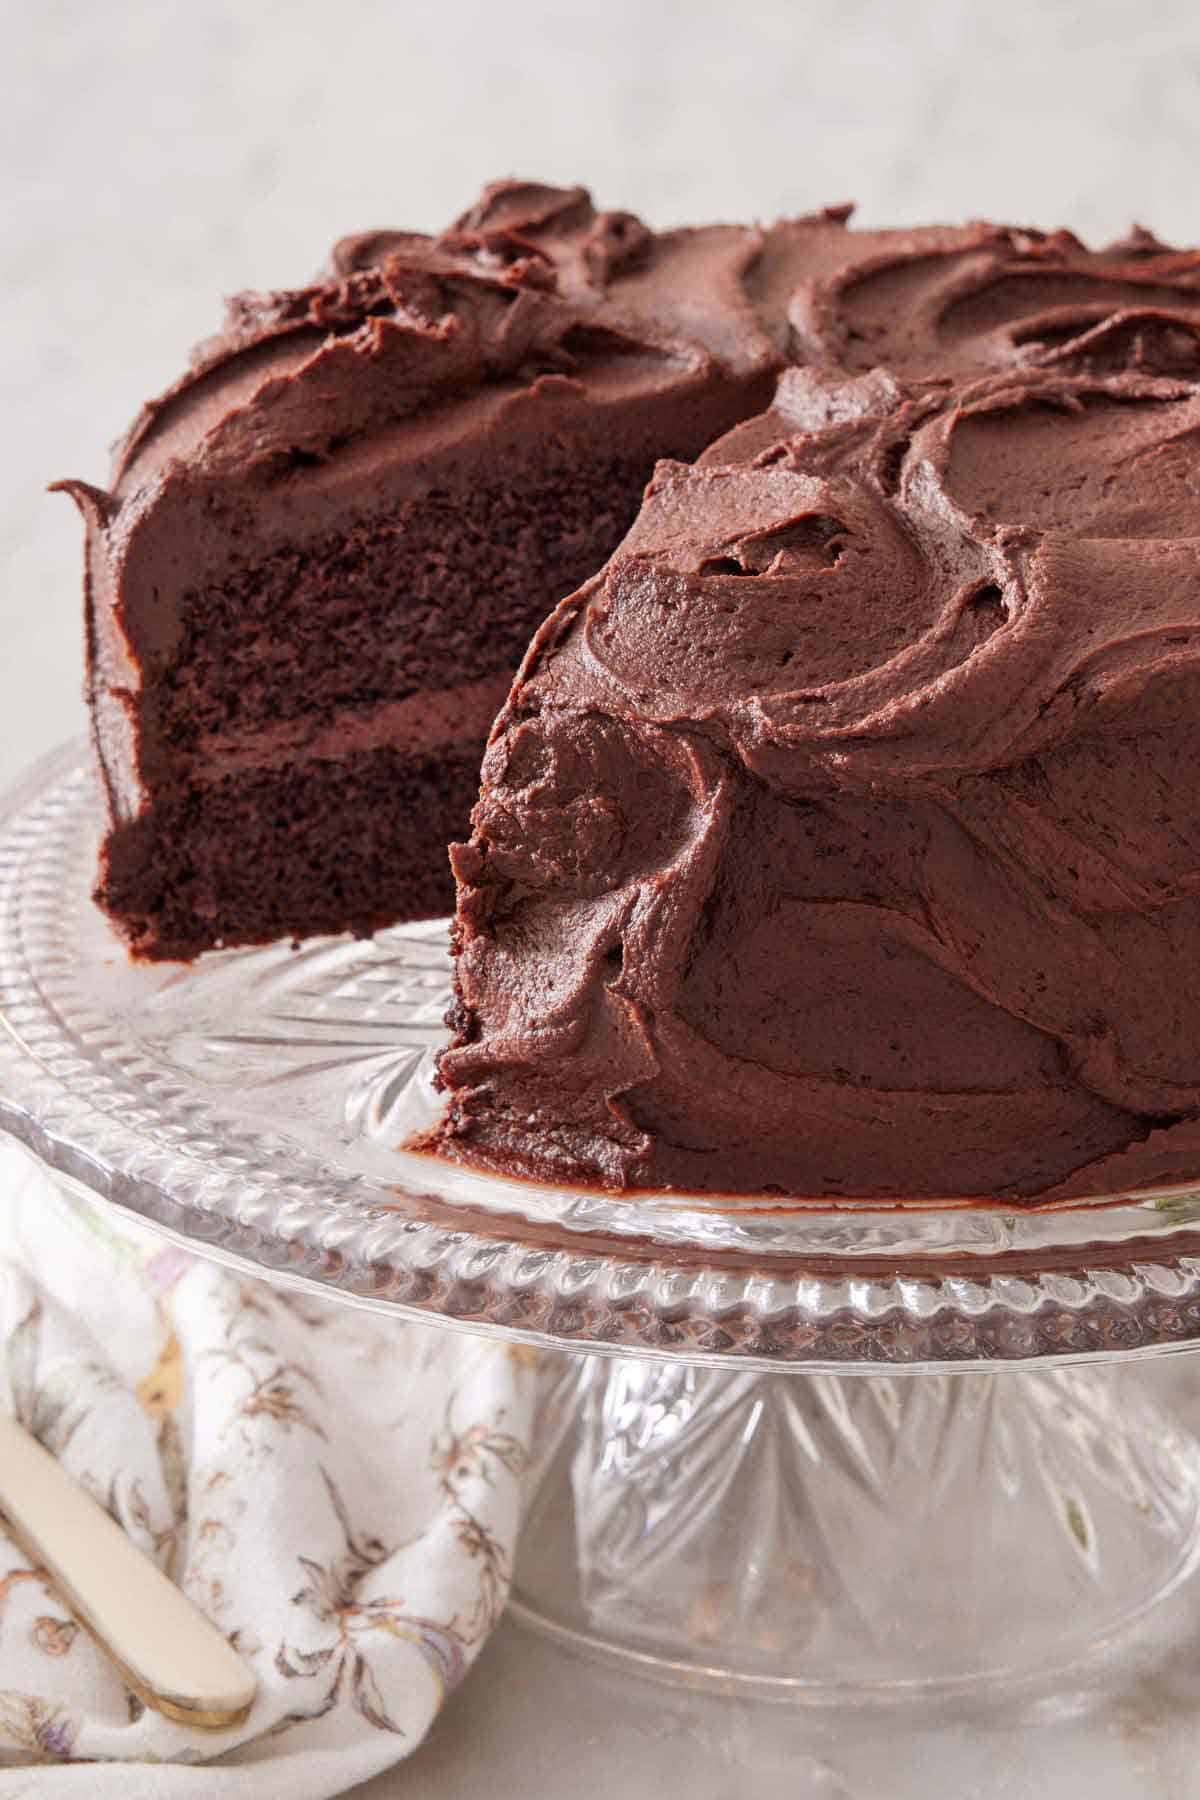 A chocolate cake with a slice taken out on a clear cake stand.